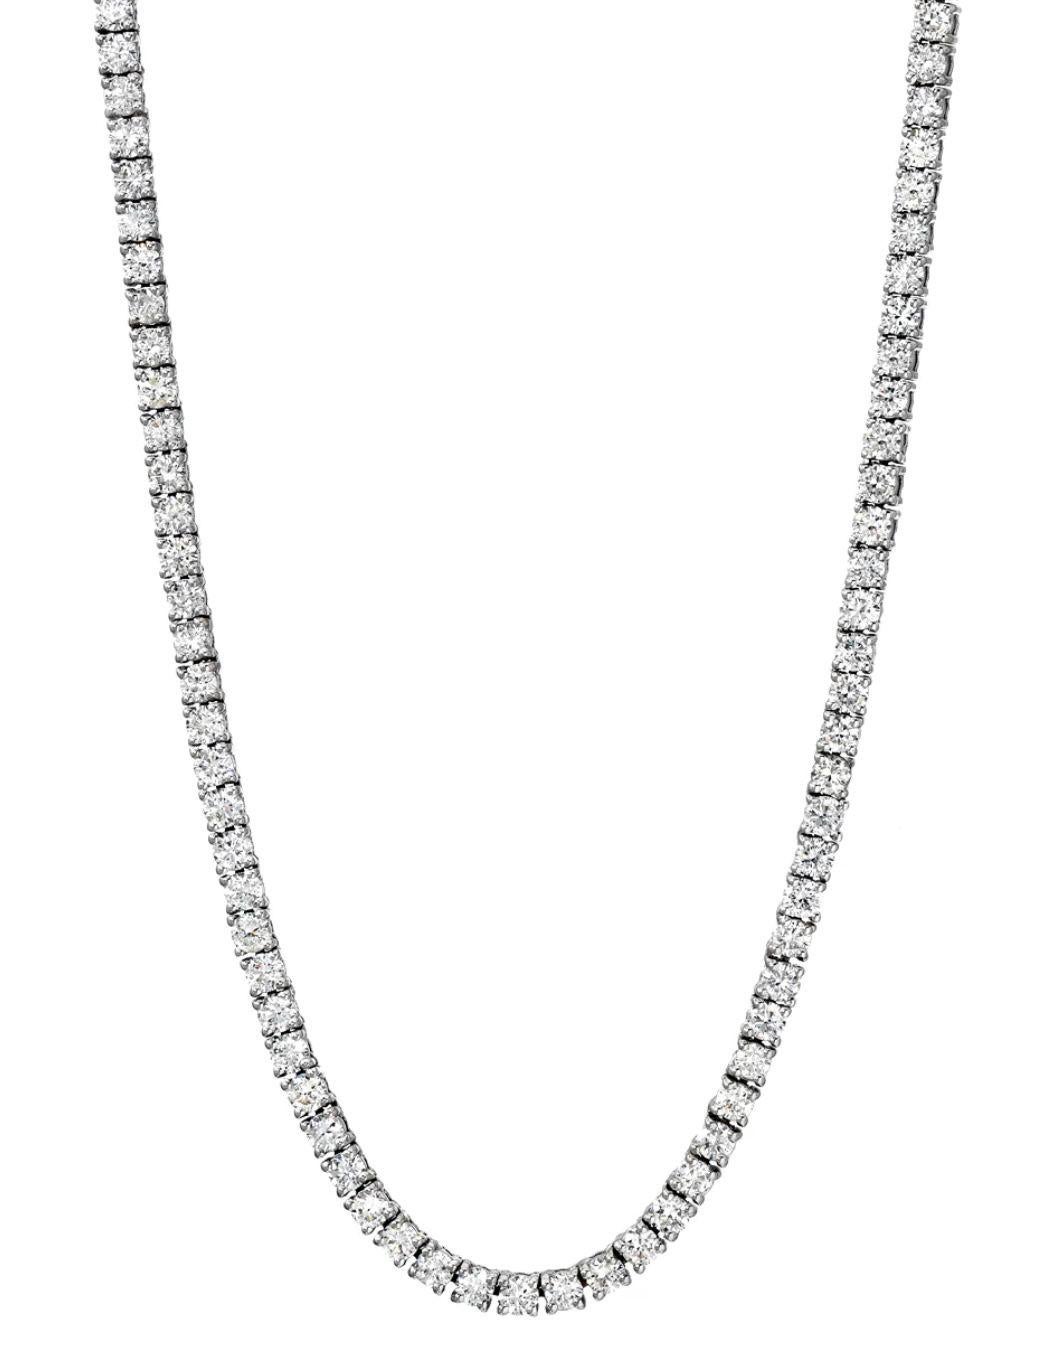 
An Amazing Estate Diamond 14k White gold (stamped) Tennis Necklace with 178 Round Brilliant Diamonds in G-H color, VS-SI clarity over all- eye clear. Each lovely round diamond is carefully set in 4 prongs. Estimated total weight of the diamonds is